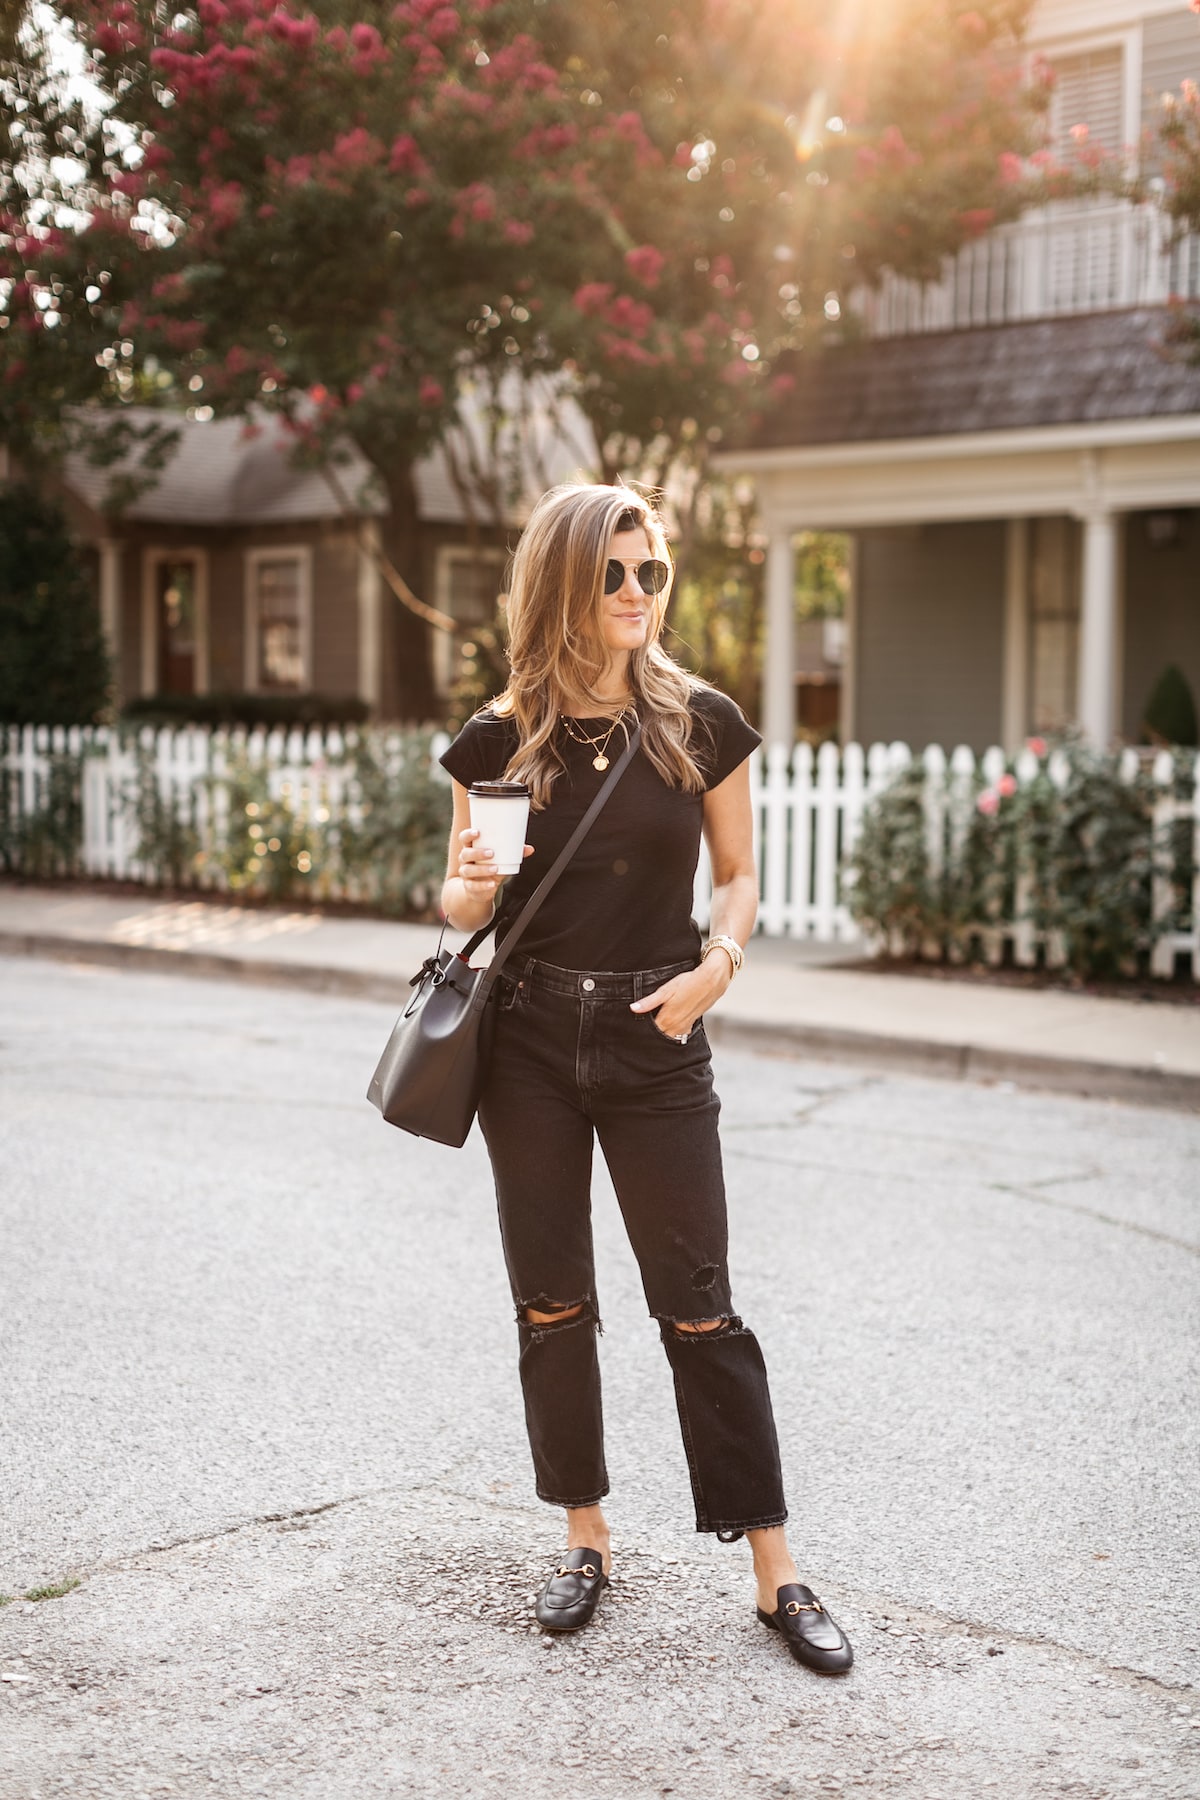 Brighton Butler wearing black tee with black jeans and black bucket bag